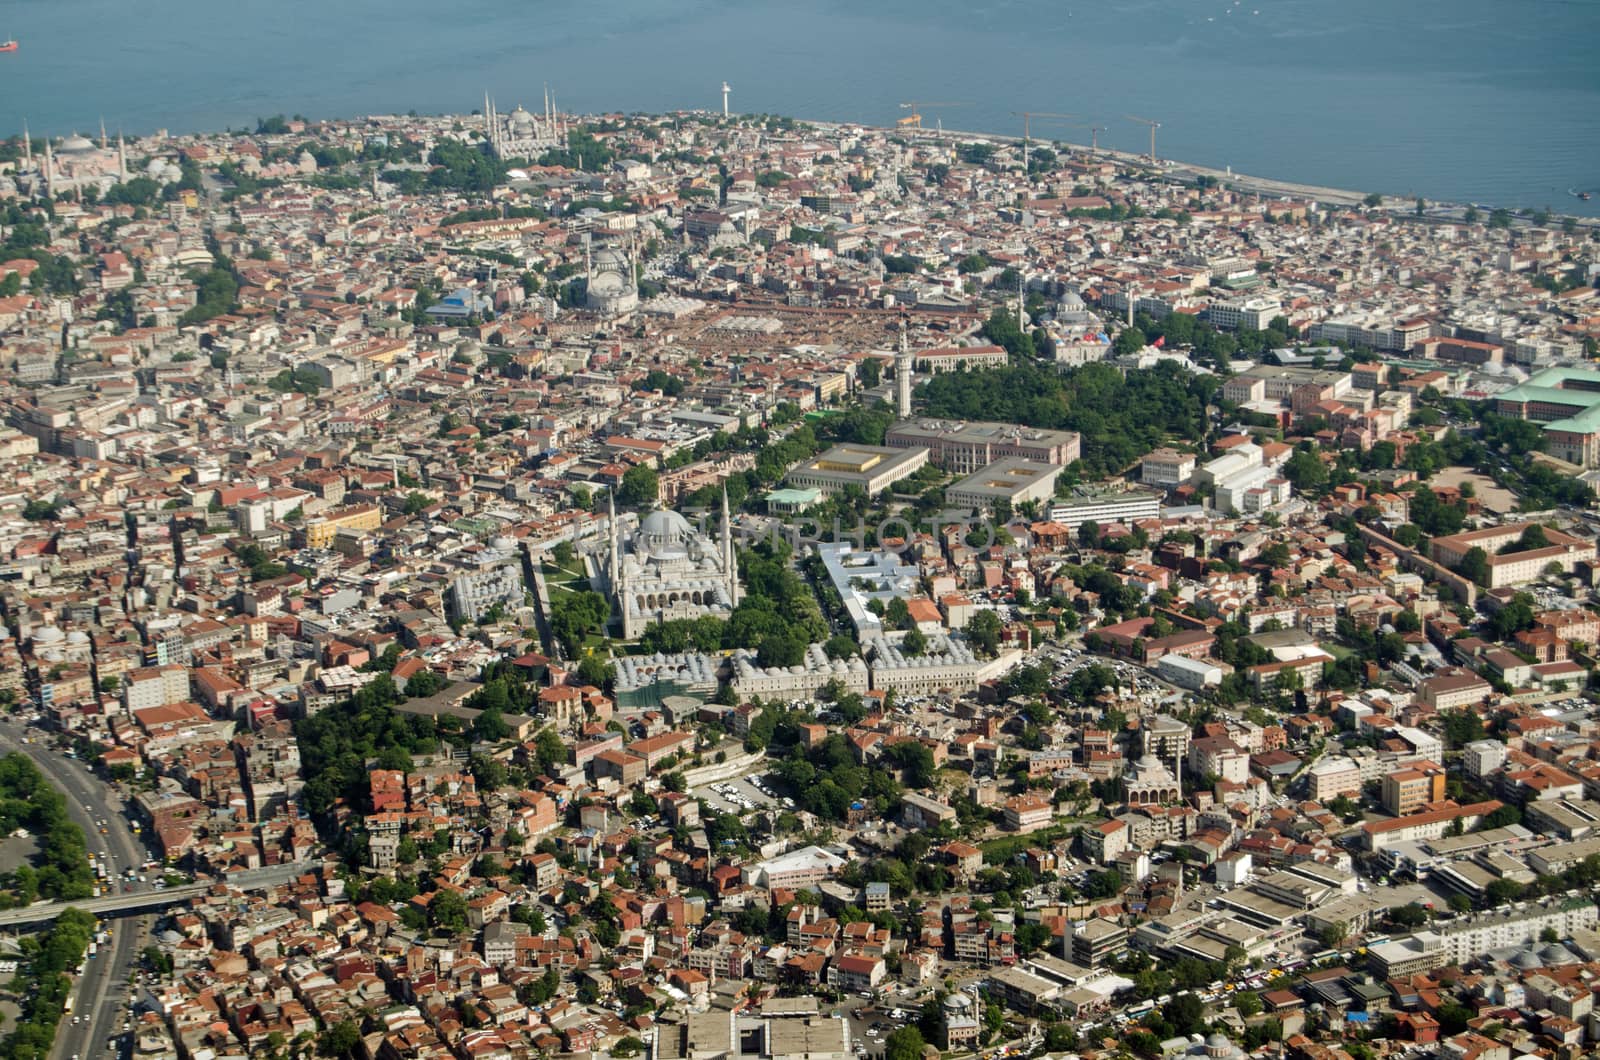 Aerial view of the old city of Istanbul with the mosques of Murat Pasa Camii, Beyazit Camii, and the famous Blue Mosque dominating the skyline.